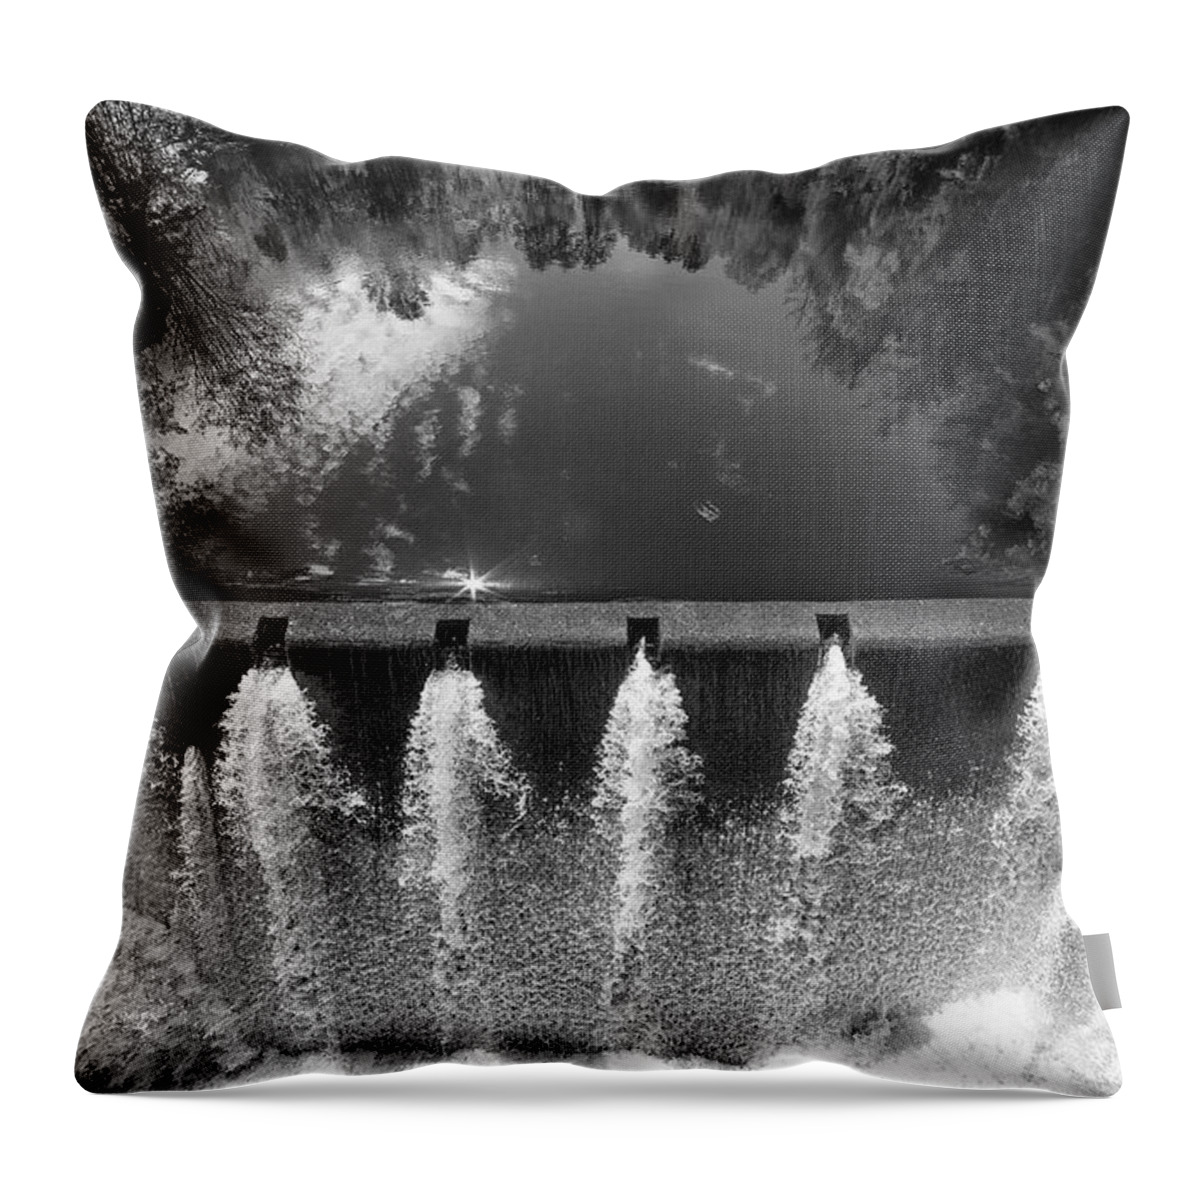 Falls Throw Pillow featuring the photograph River Dam by Eunice Gibb